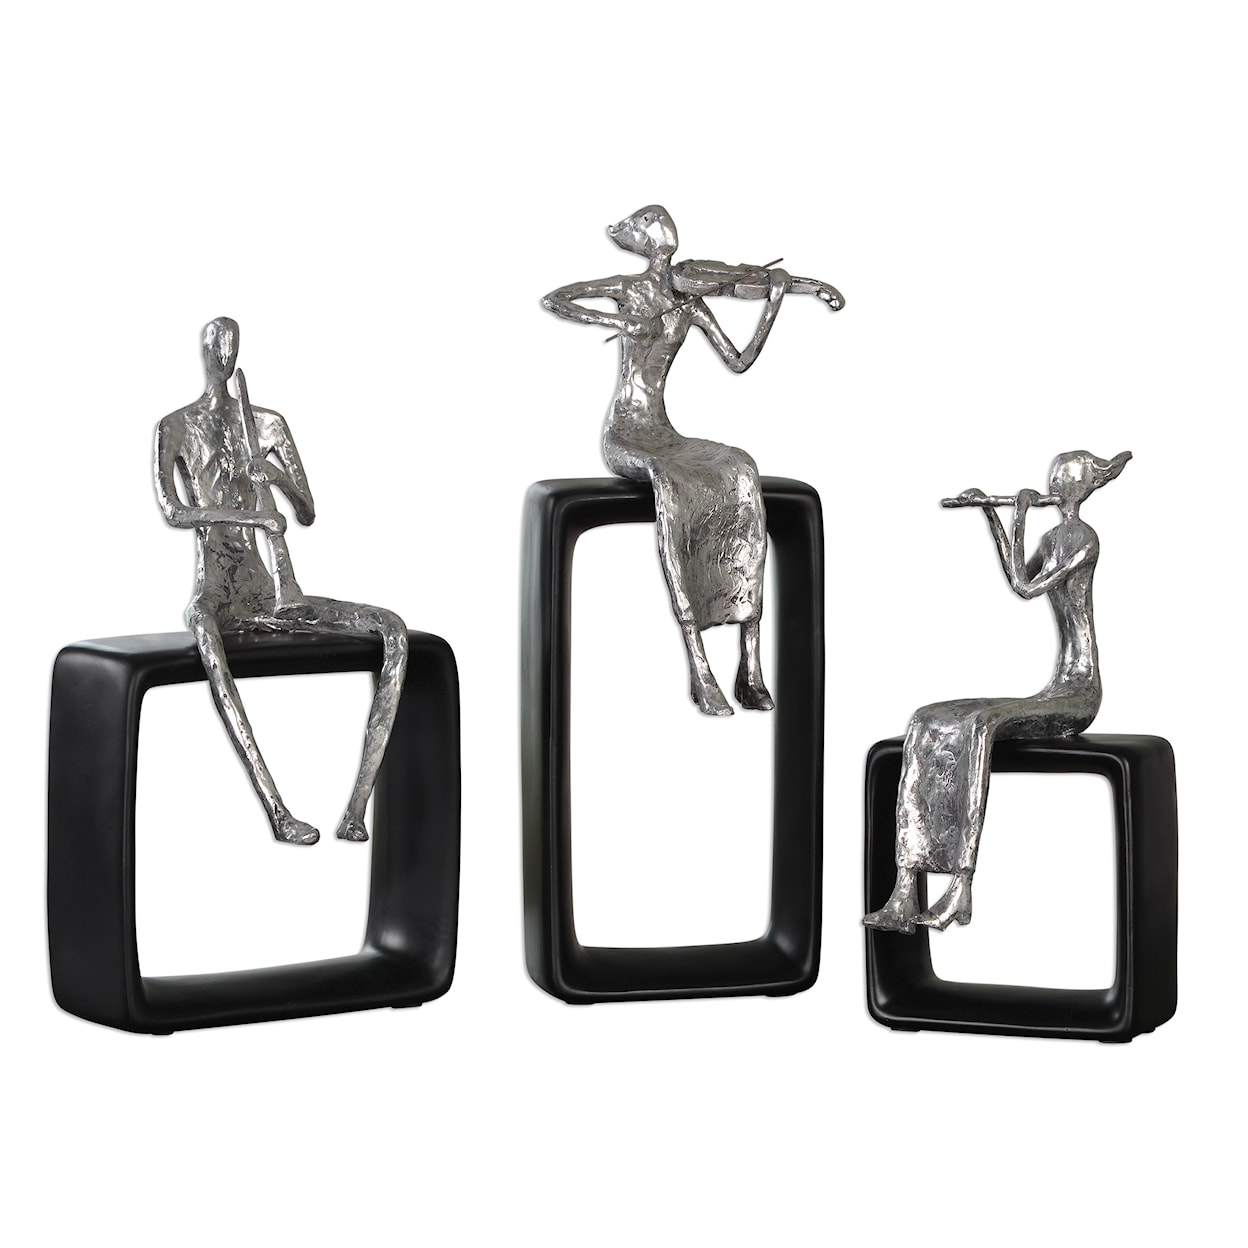 Uttermost Accessories - Statues and Figurines Musical Ensemble Statues, S/3